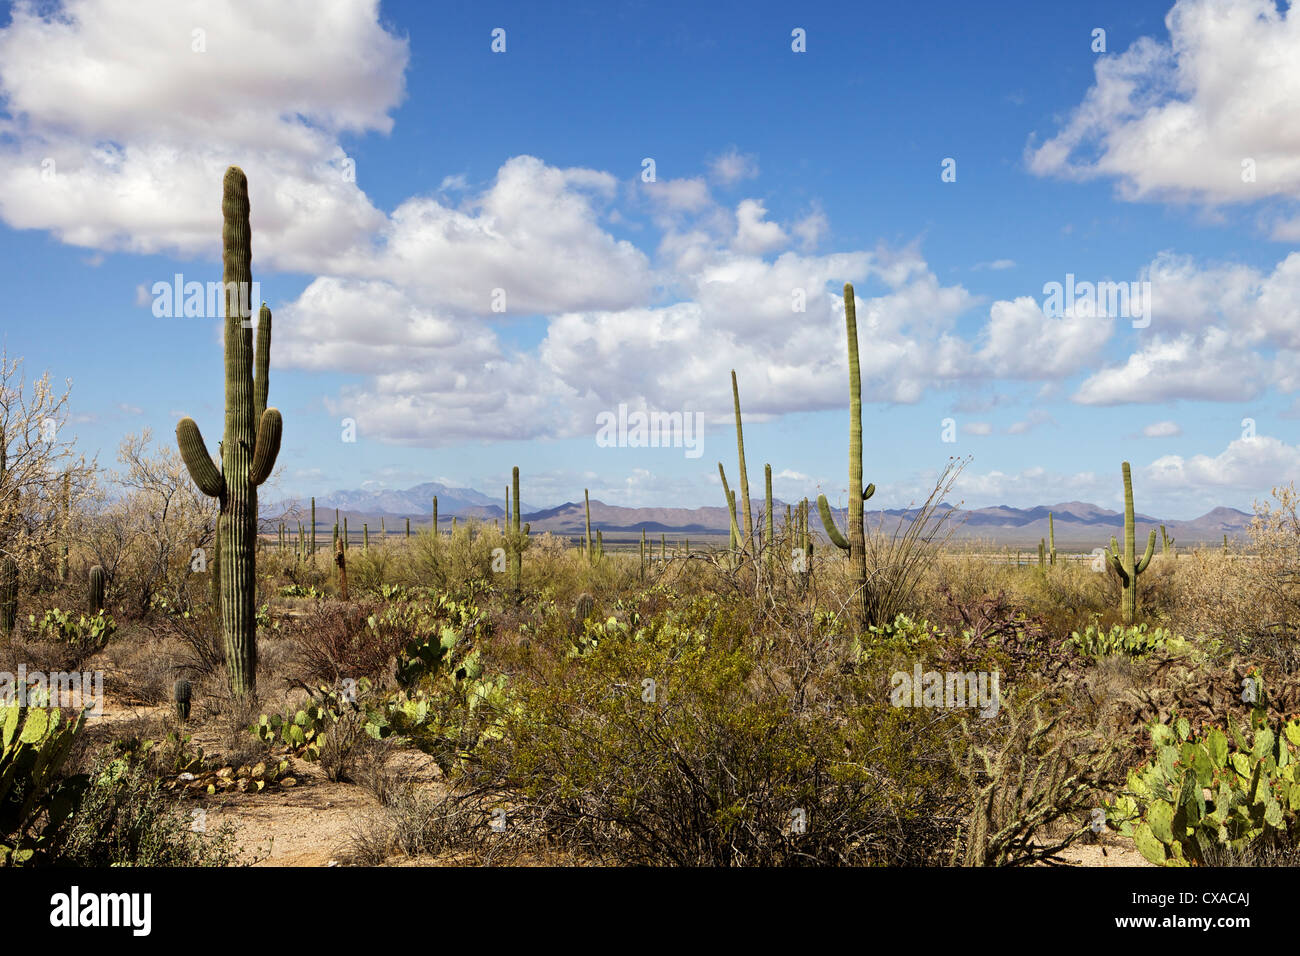 Saguaro cactus  with mountains in the background in Saguaro National Park Stock Photo